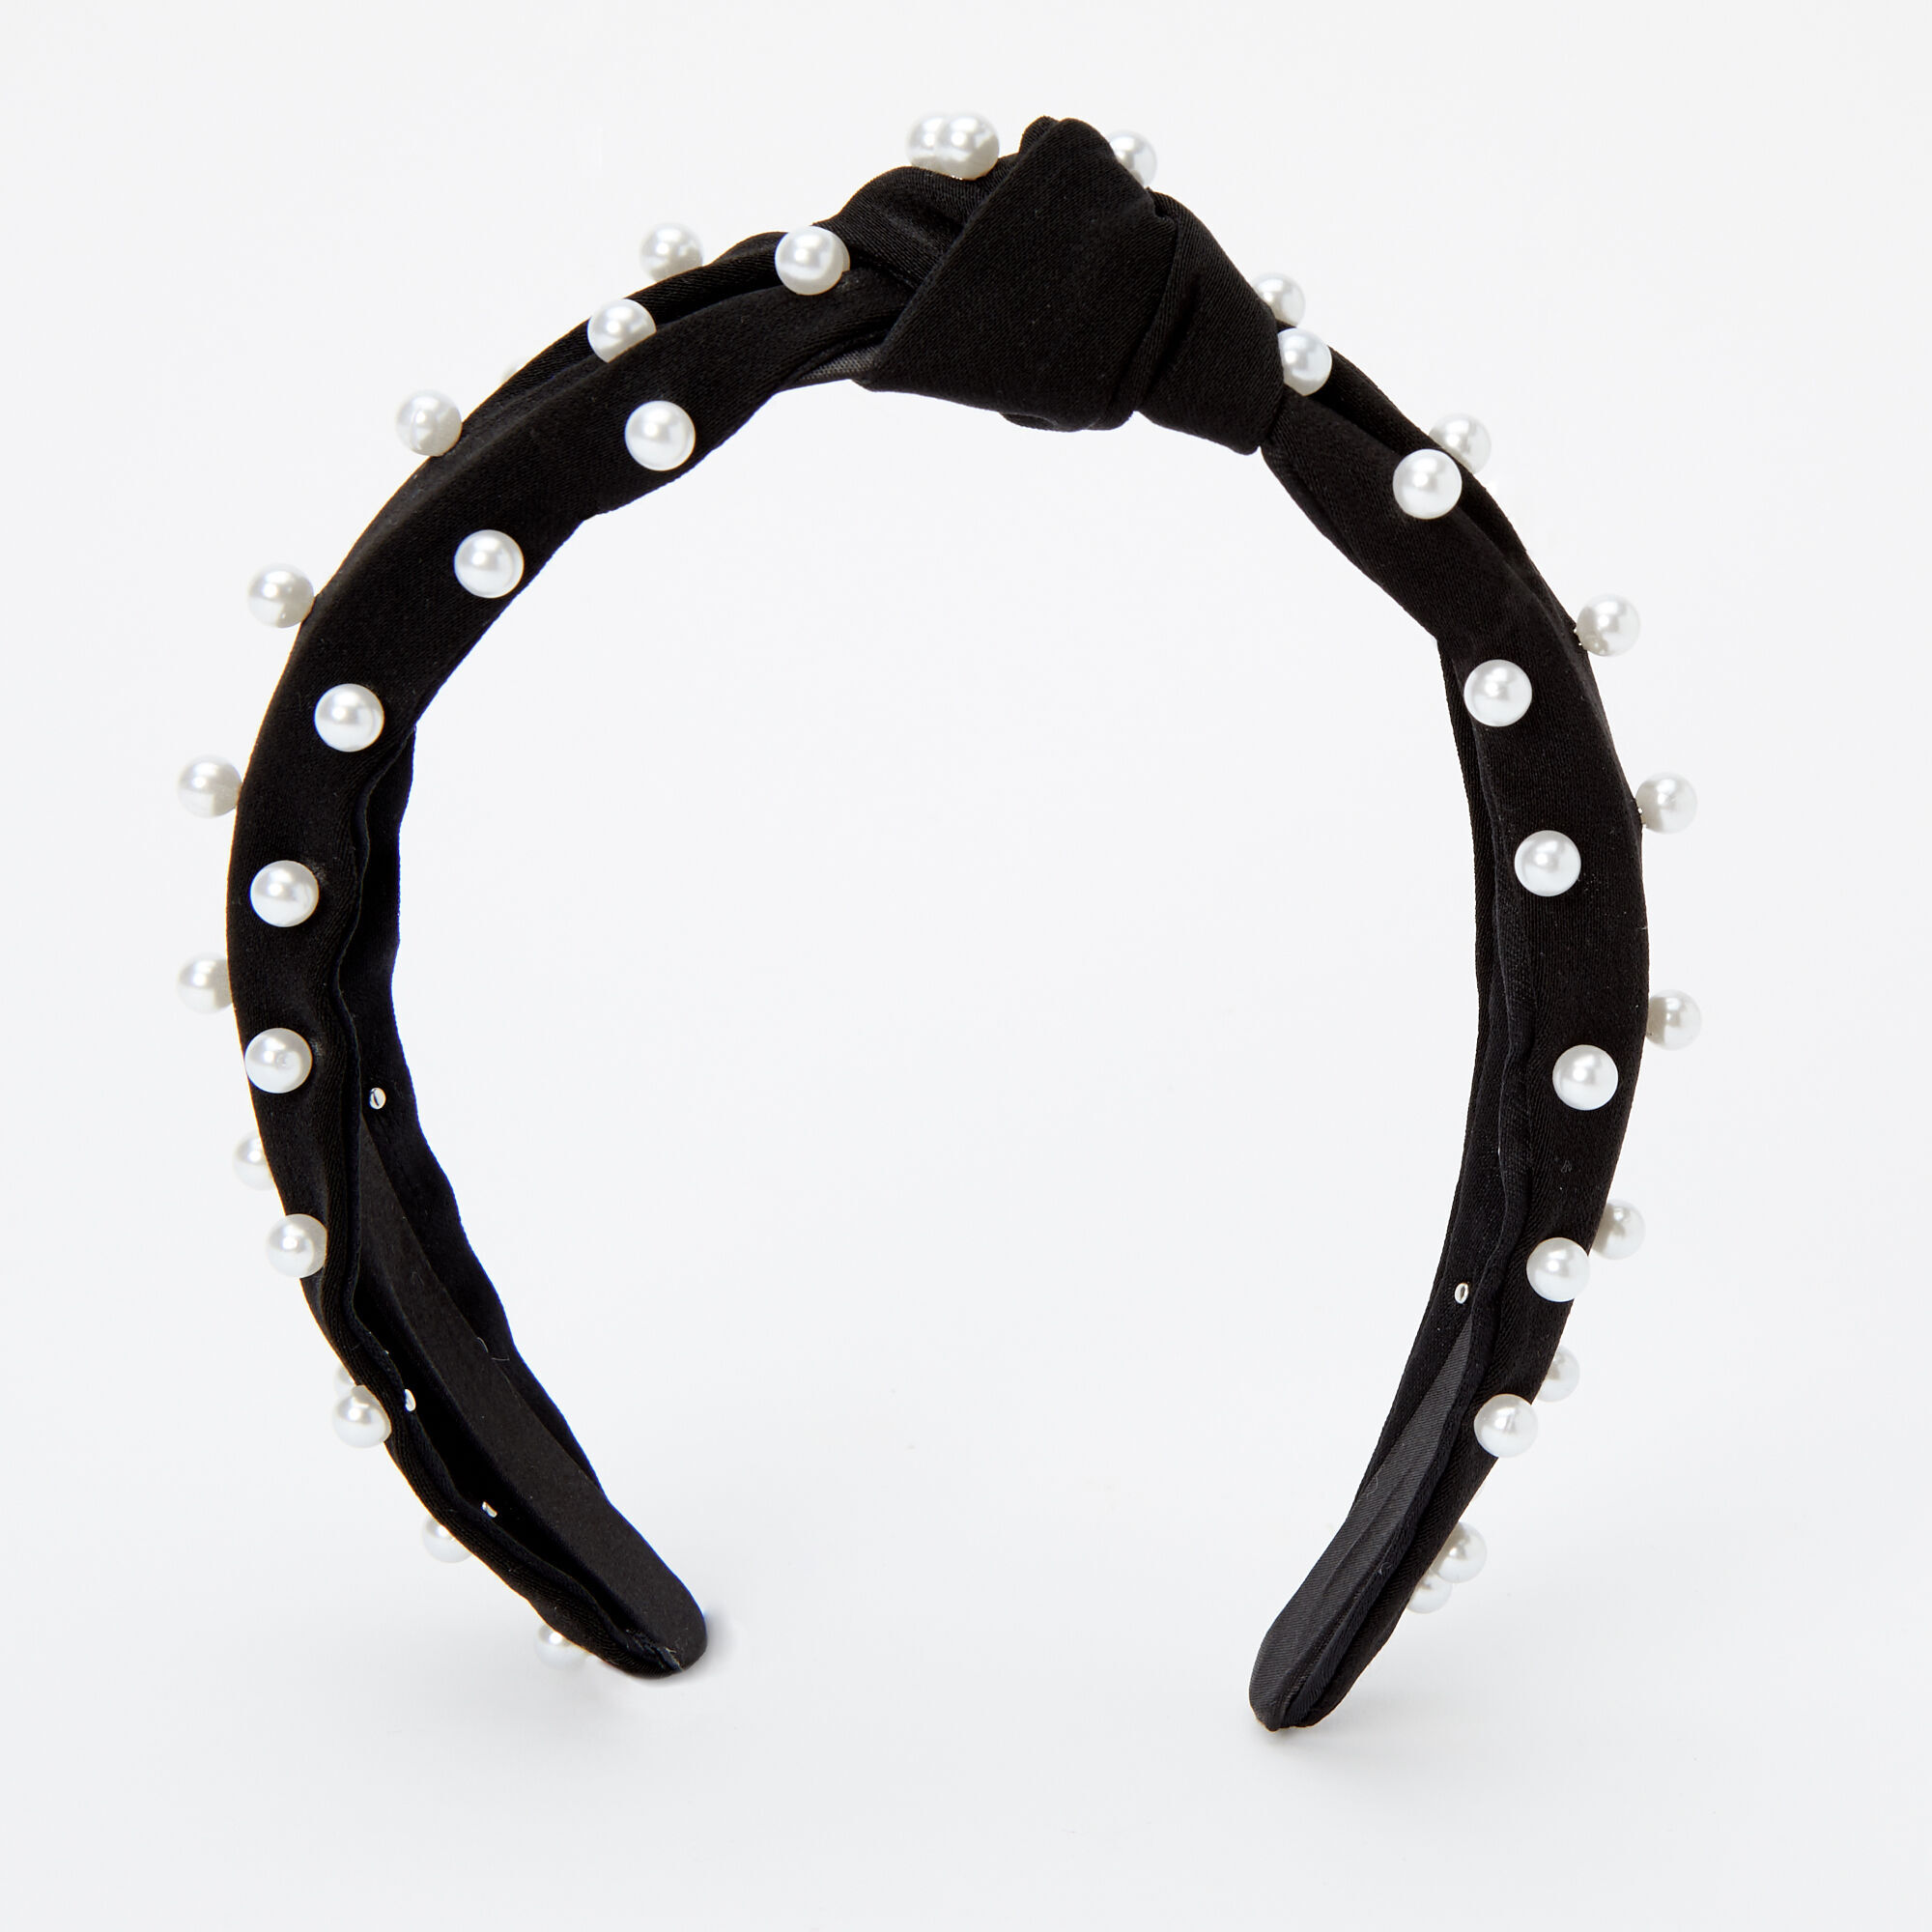 View Claires Pearl Embellished Knotted Headband Black information